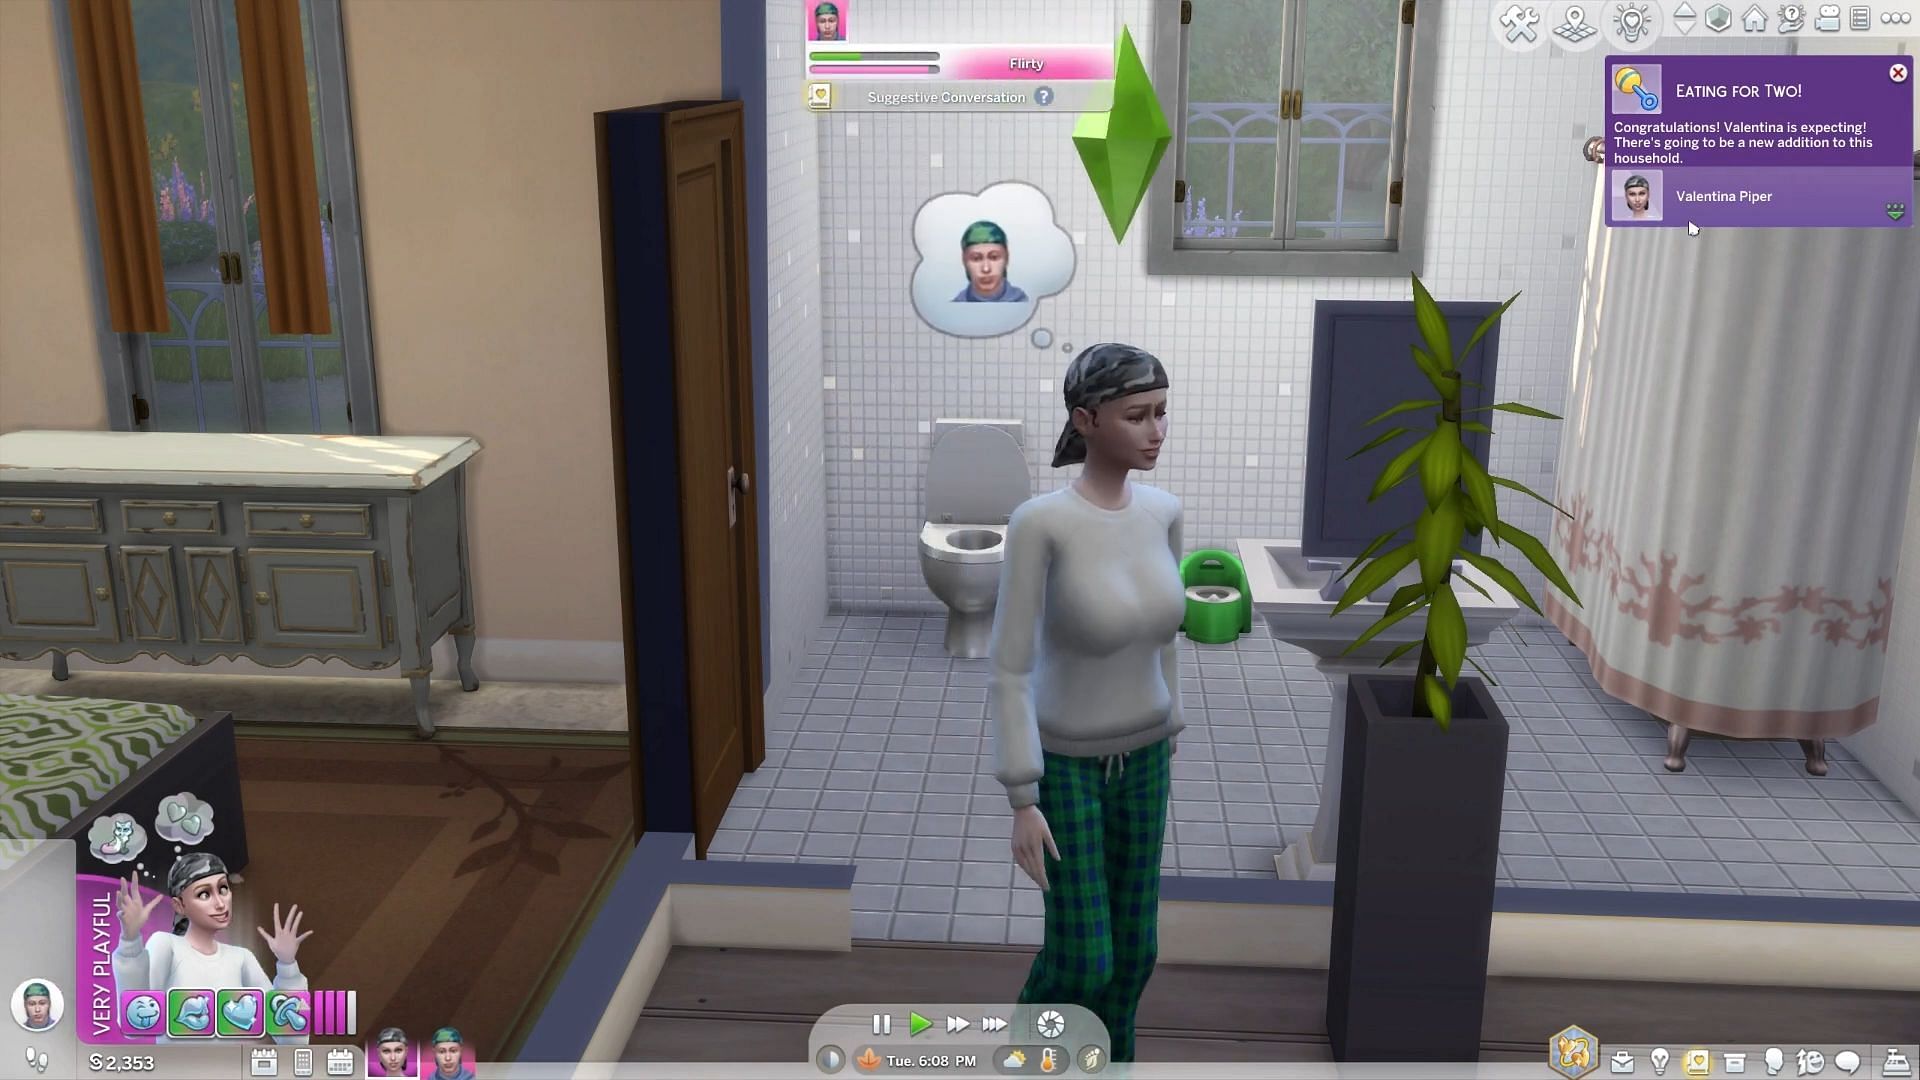 Taking a pregnancy test in The Sims 4 (Image via YouTube/GamesKeys)